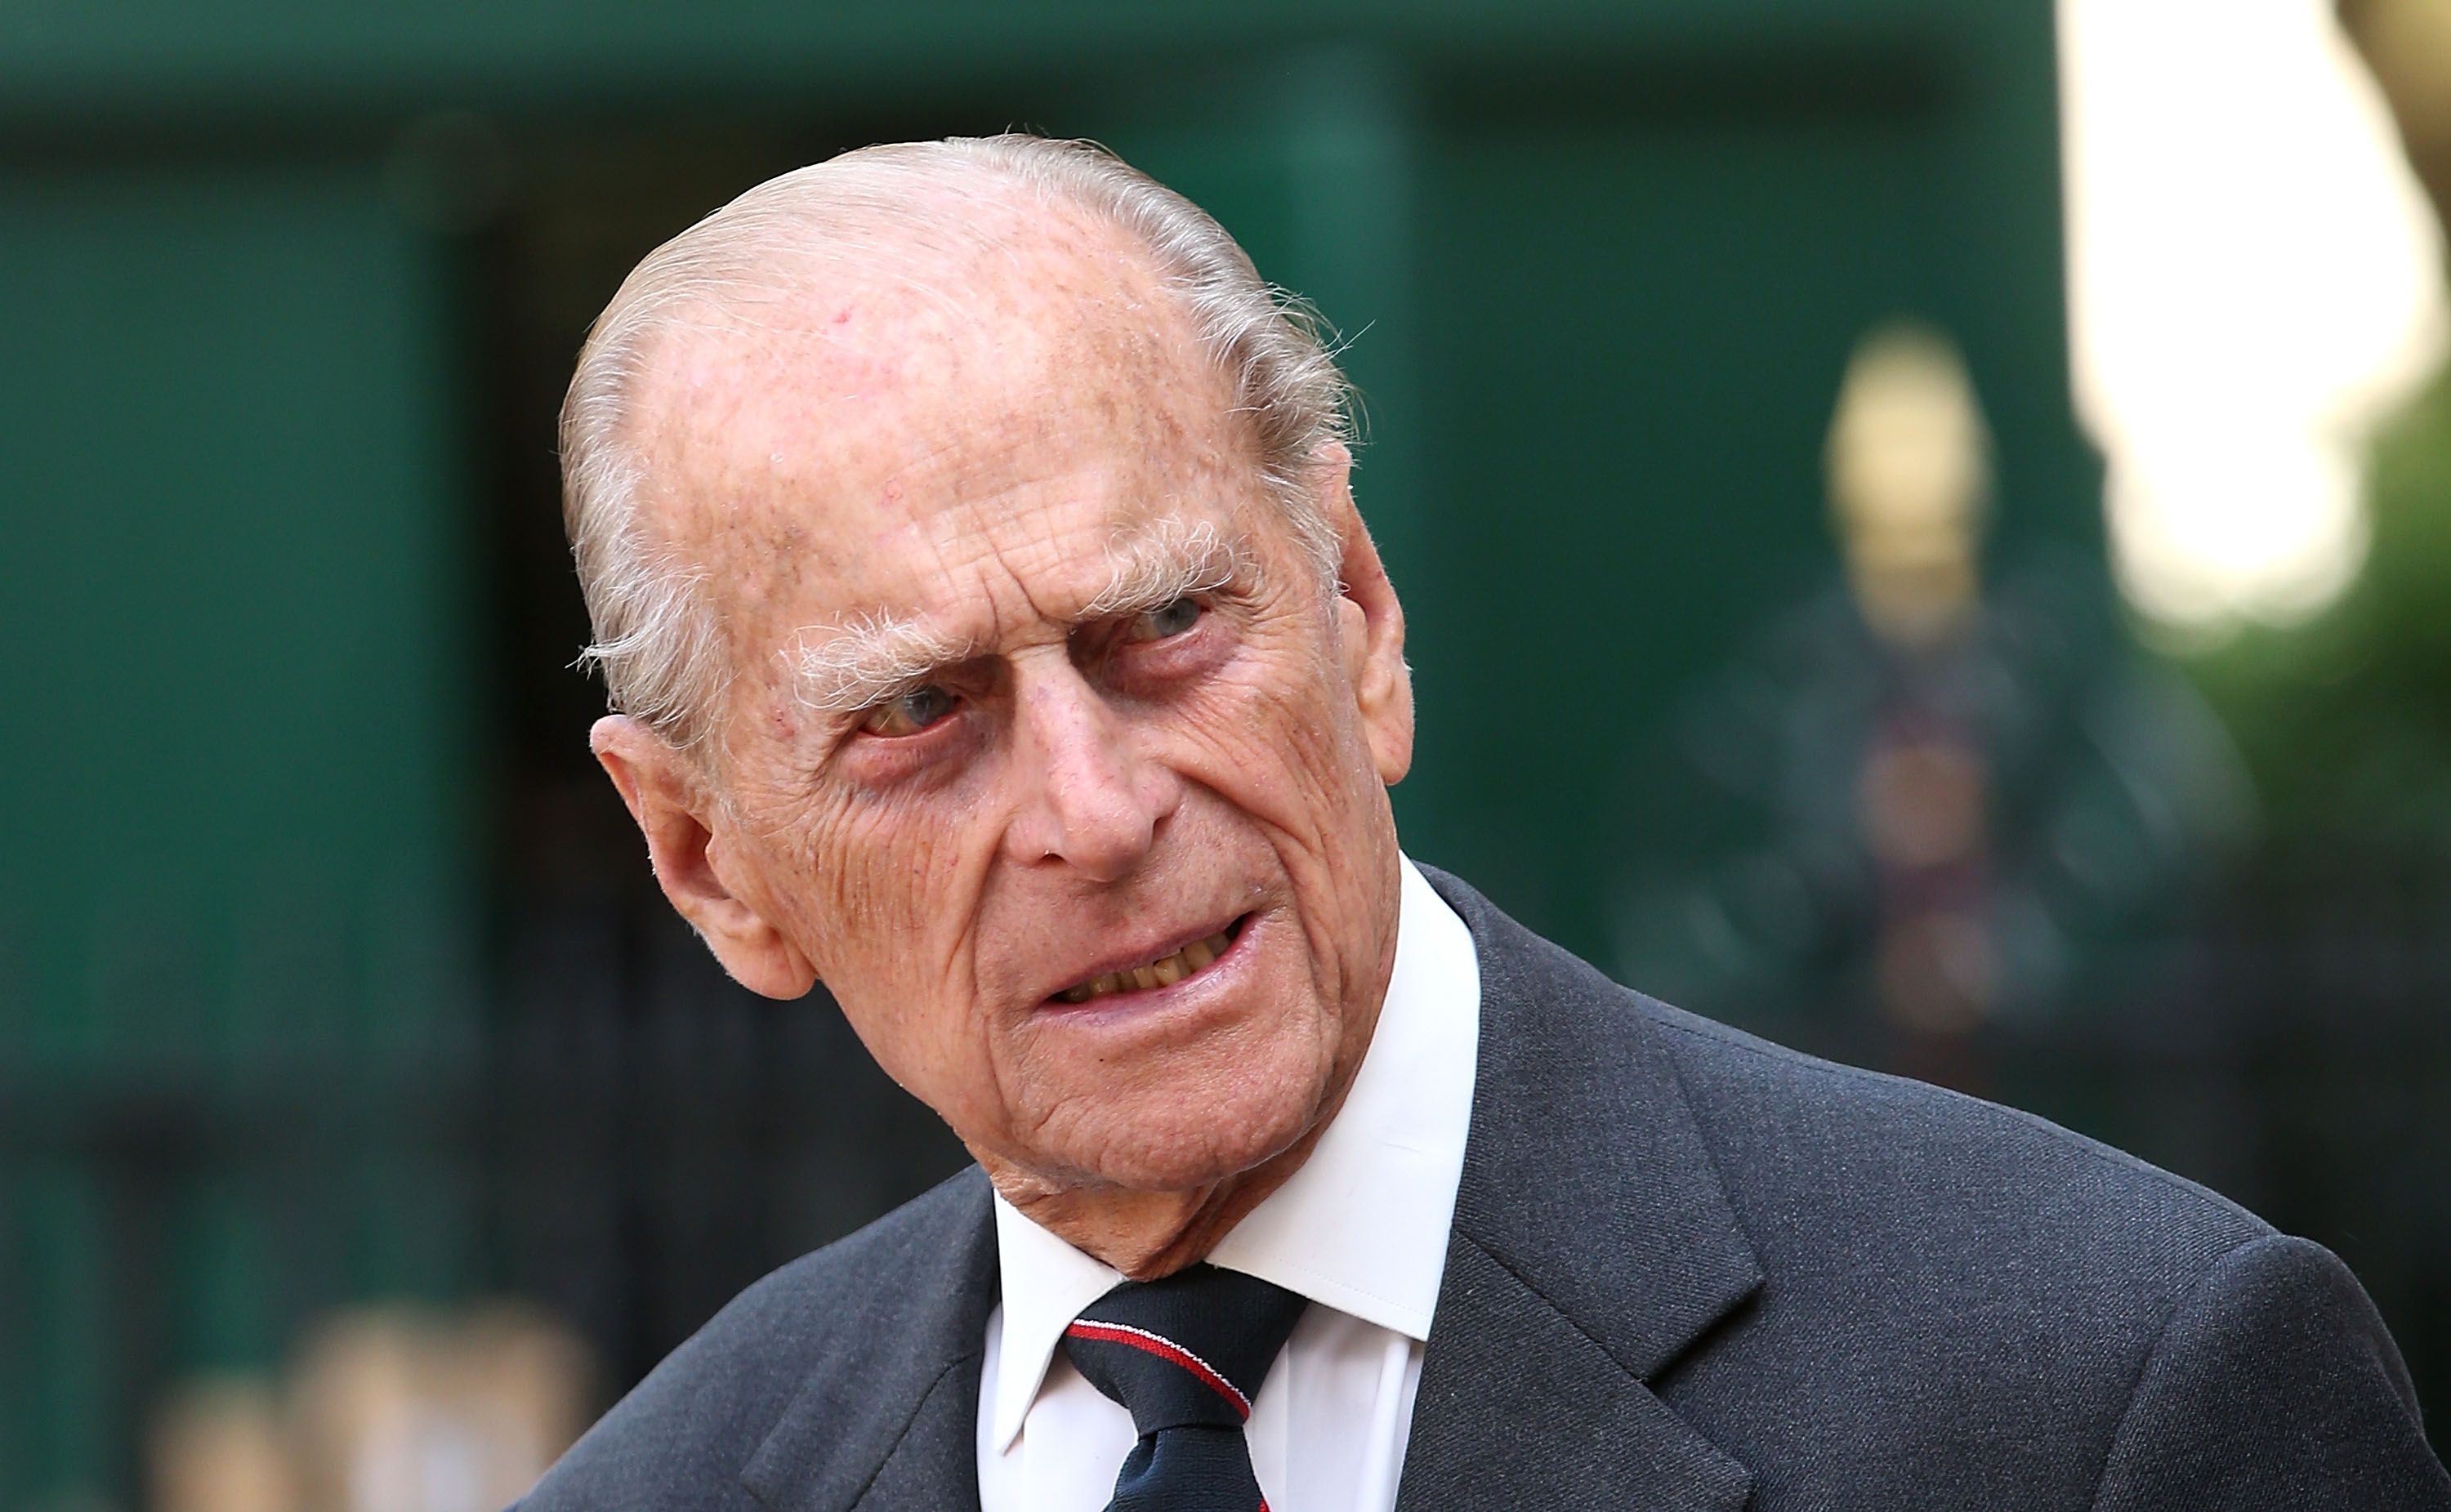 Prince Philip during a service of dedication to Admiral Arthur Philip at Westminster Abbey on July 9, 2014 in London, England. | Source: Getty Images